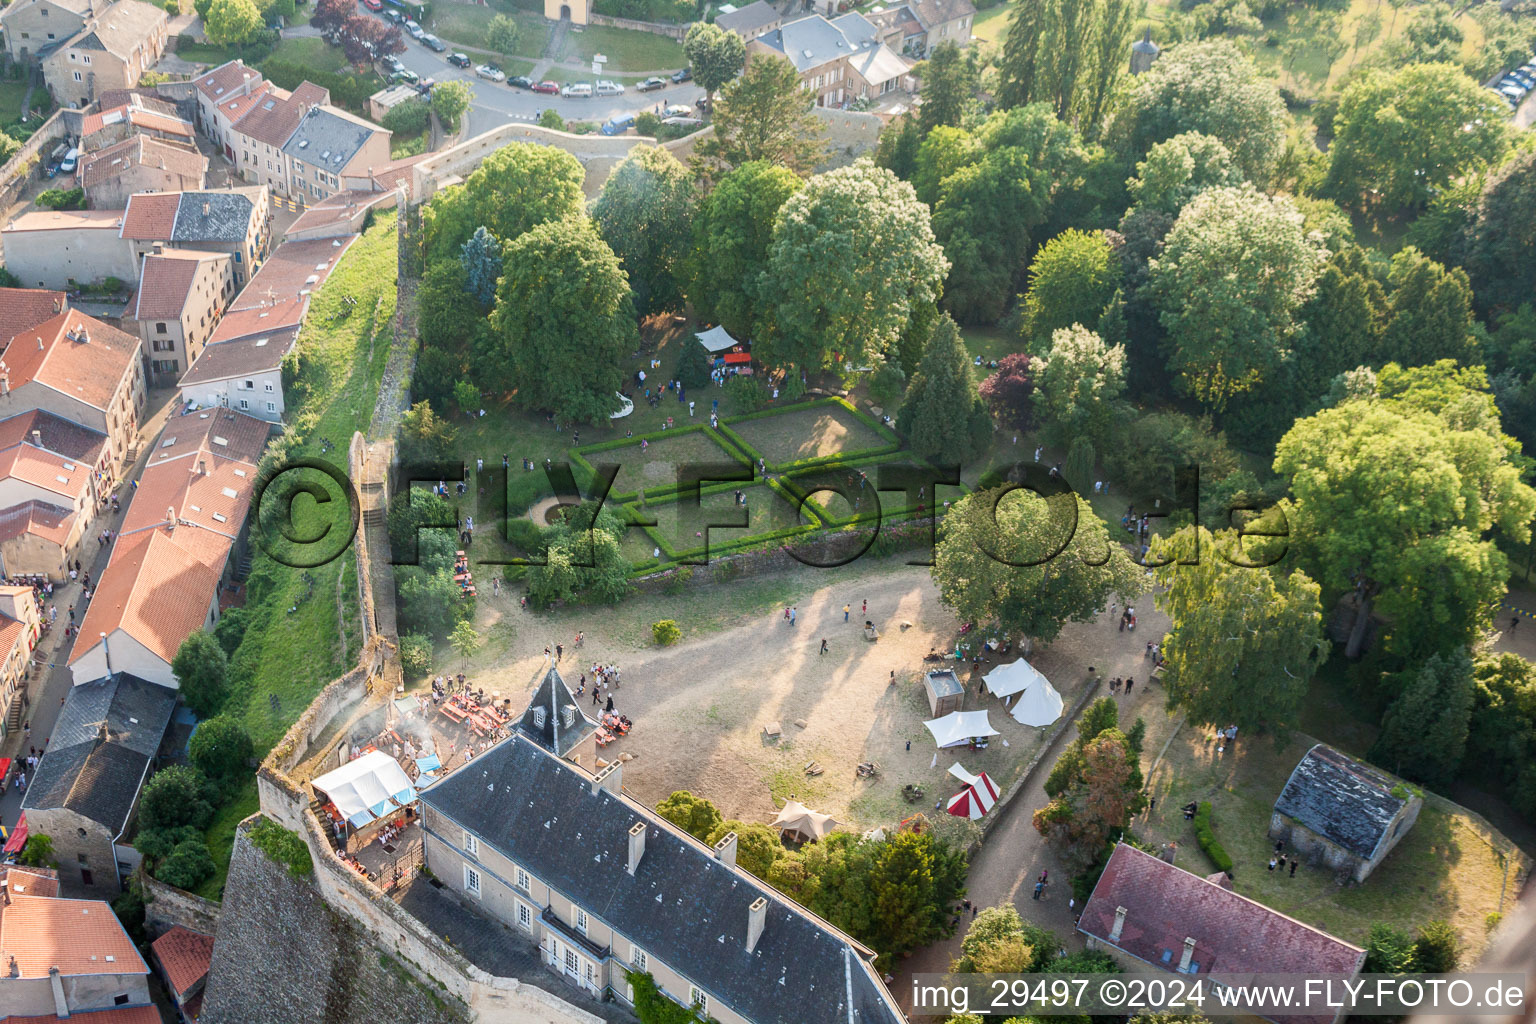 Castle of the fortress Fort Rodemack in Rodemack in Grand Est, France from above